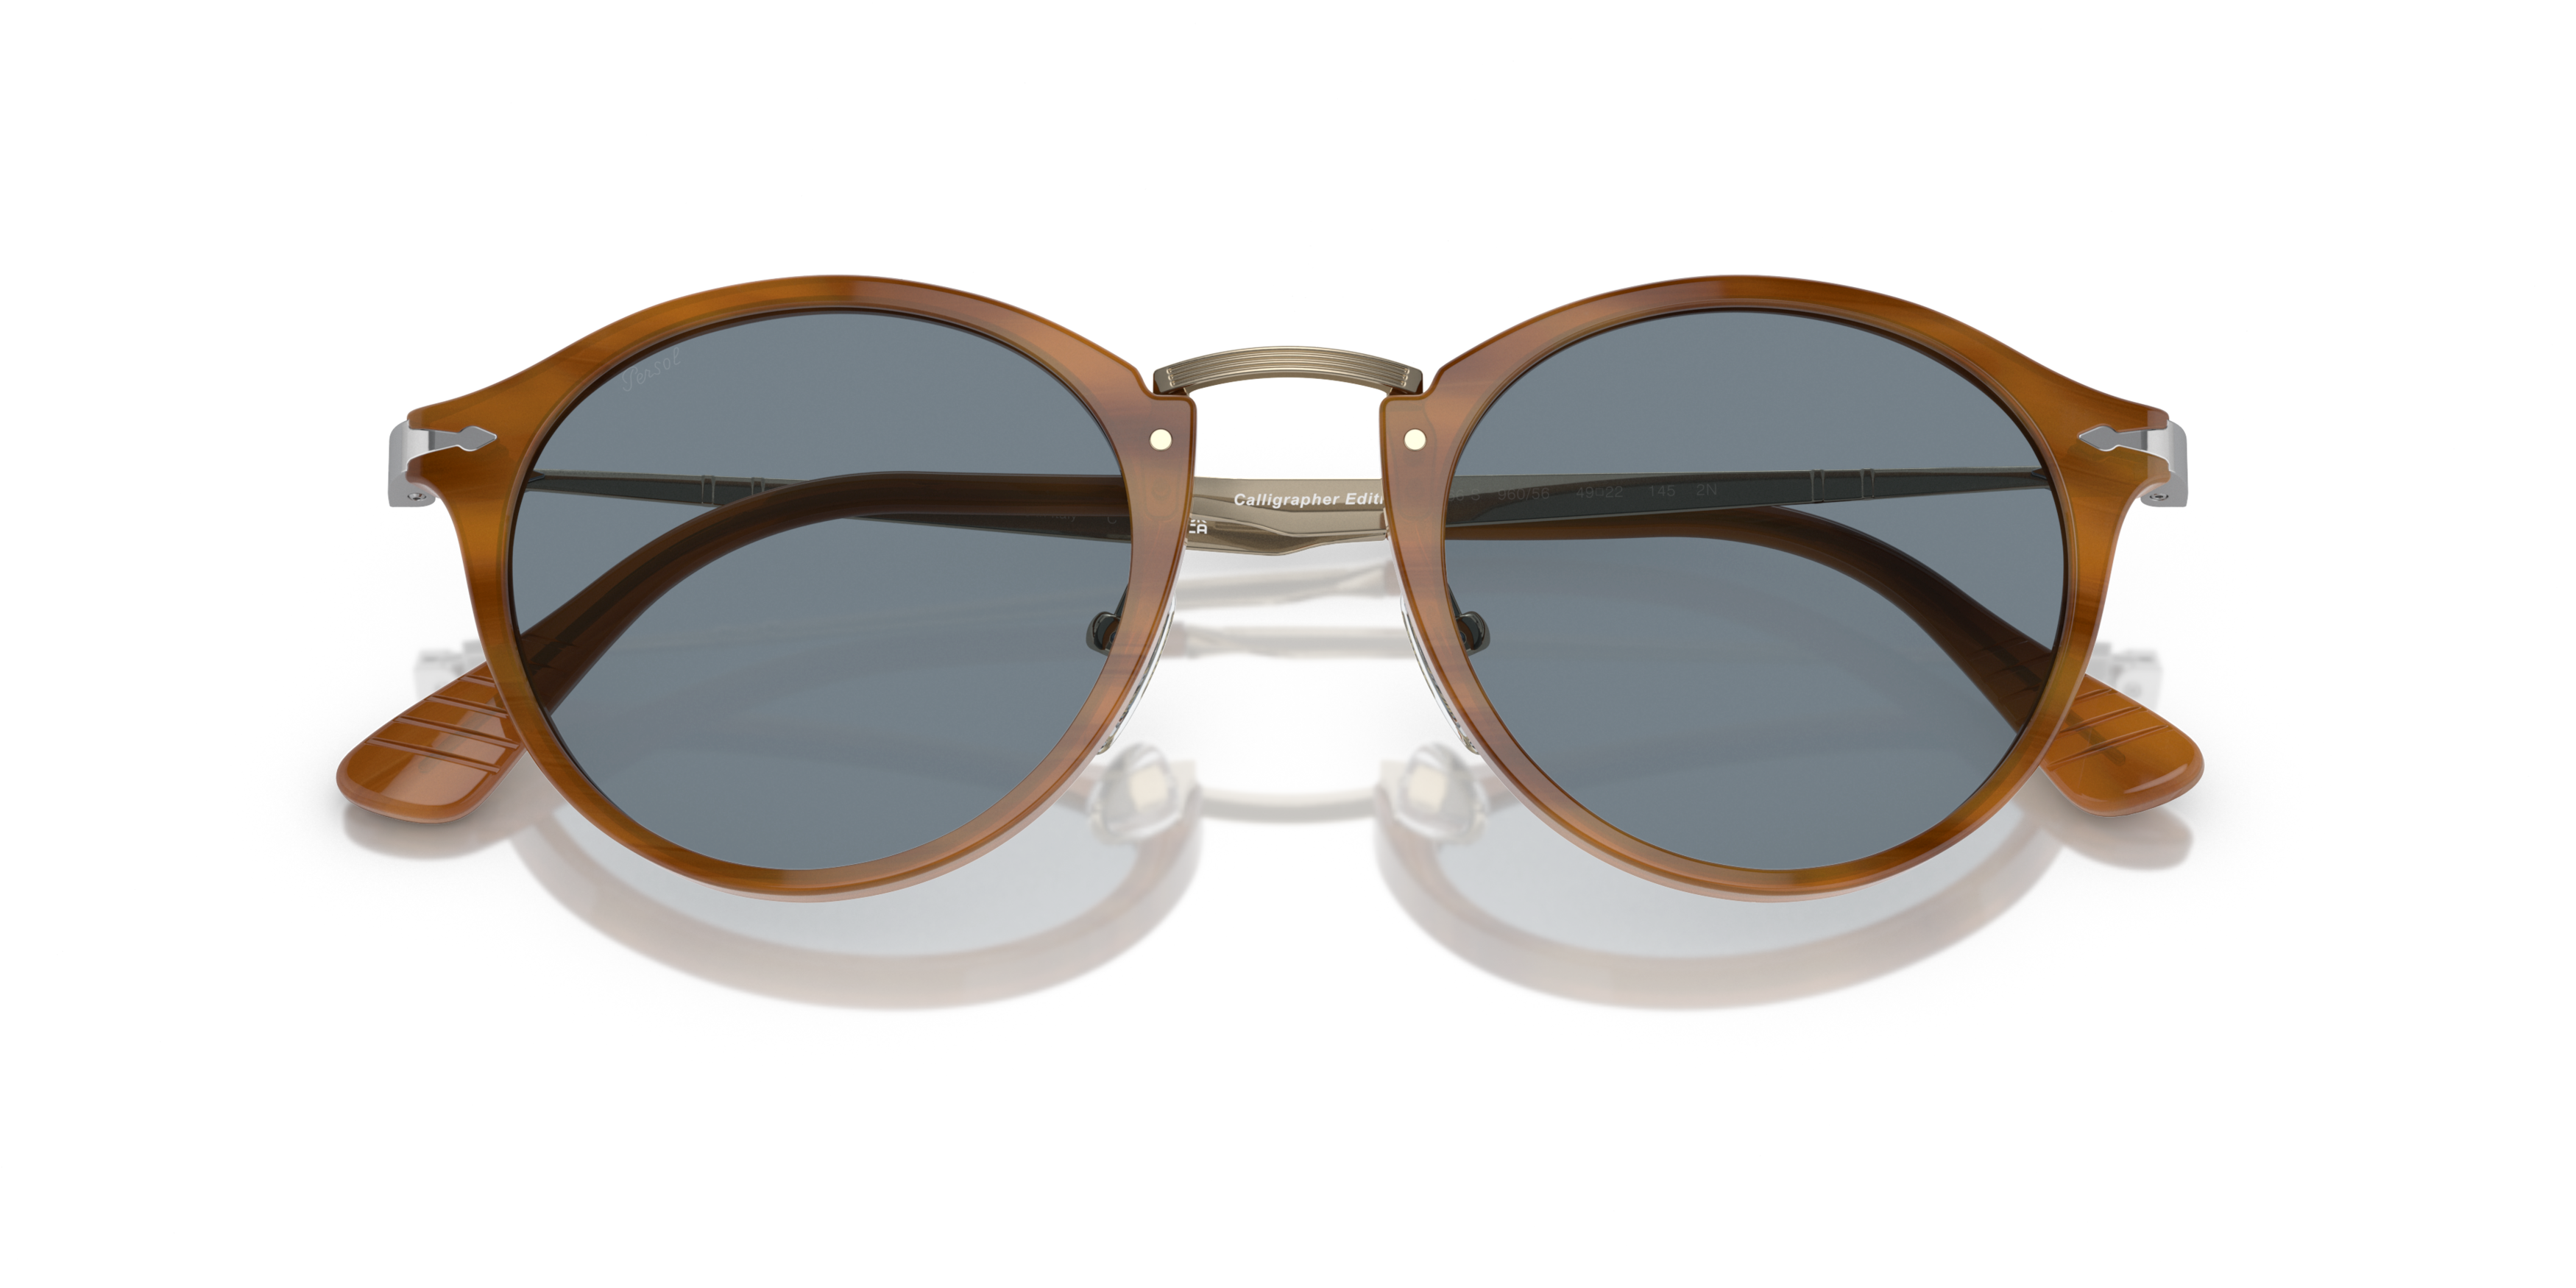 [products.image.folded] Persol 0PO3166S 960/56